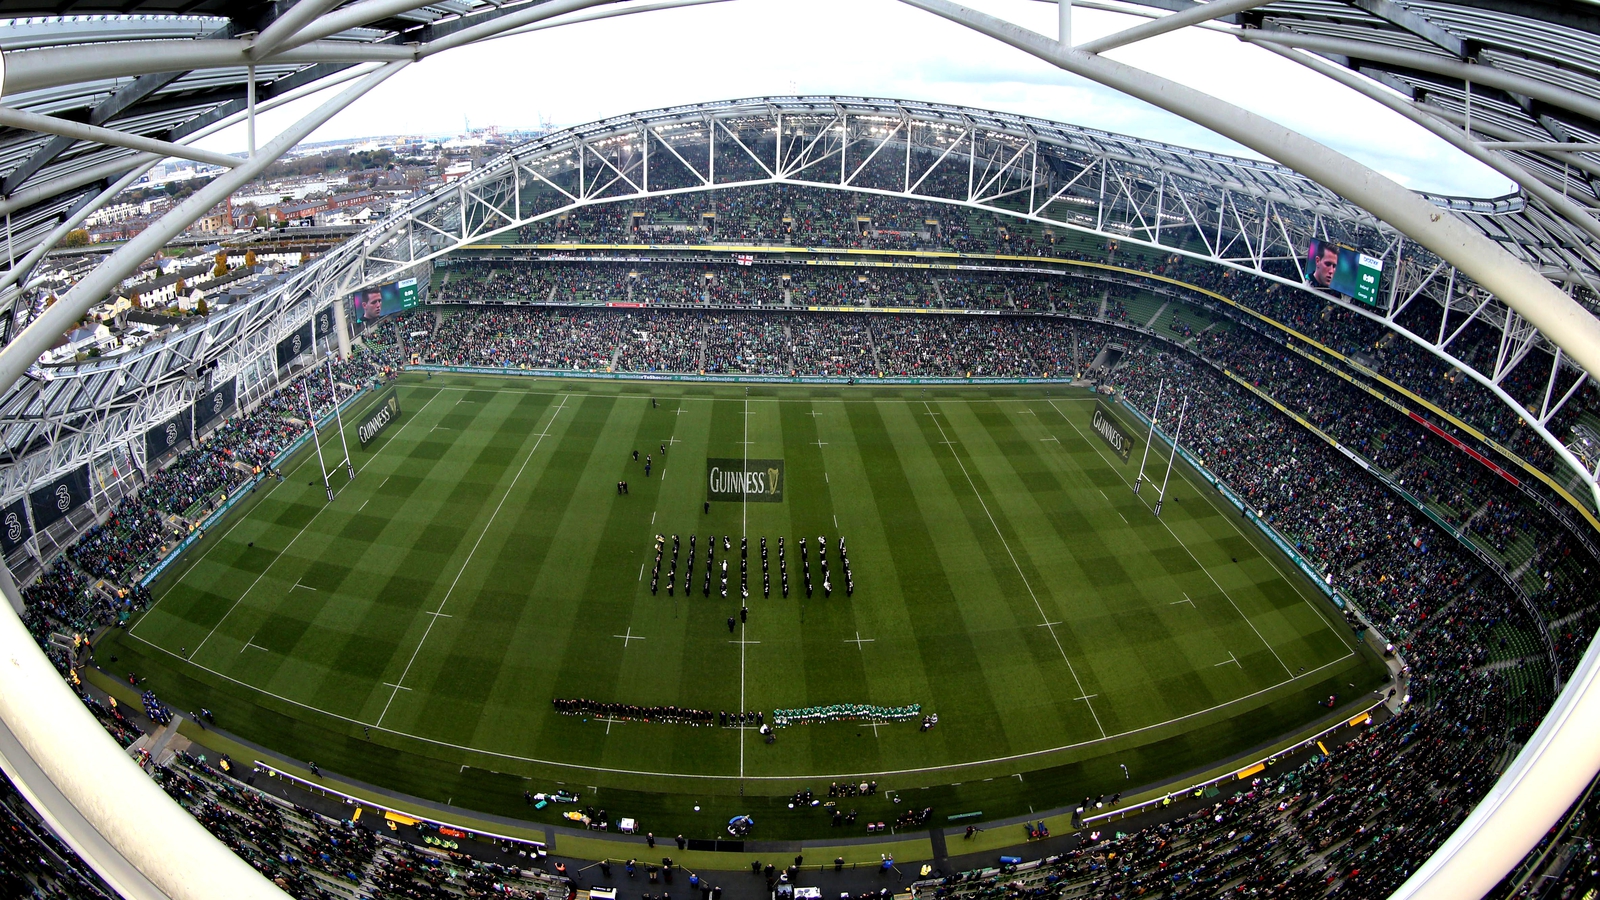 Ireland confirms bid for 2023 Rugby World Cup